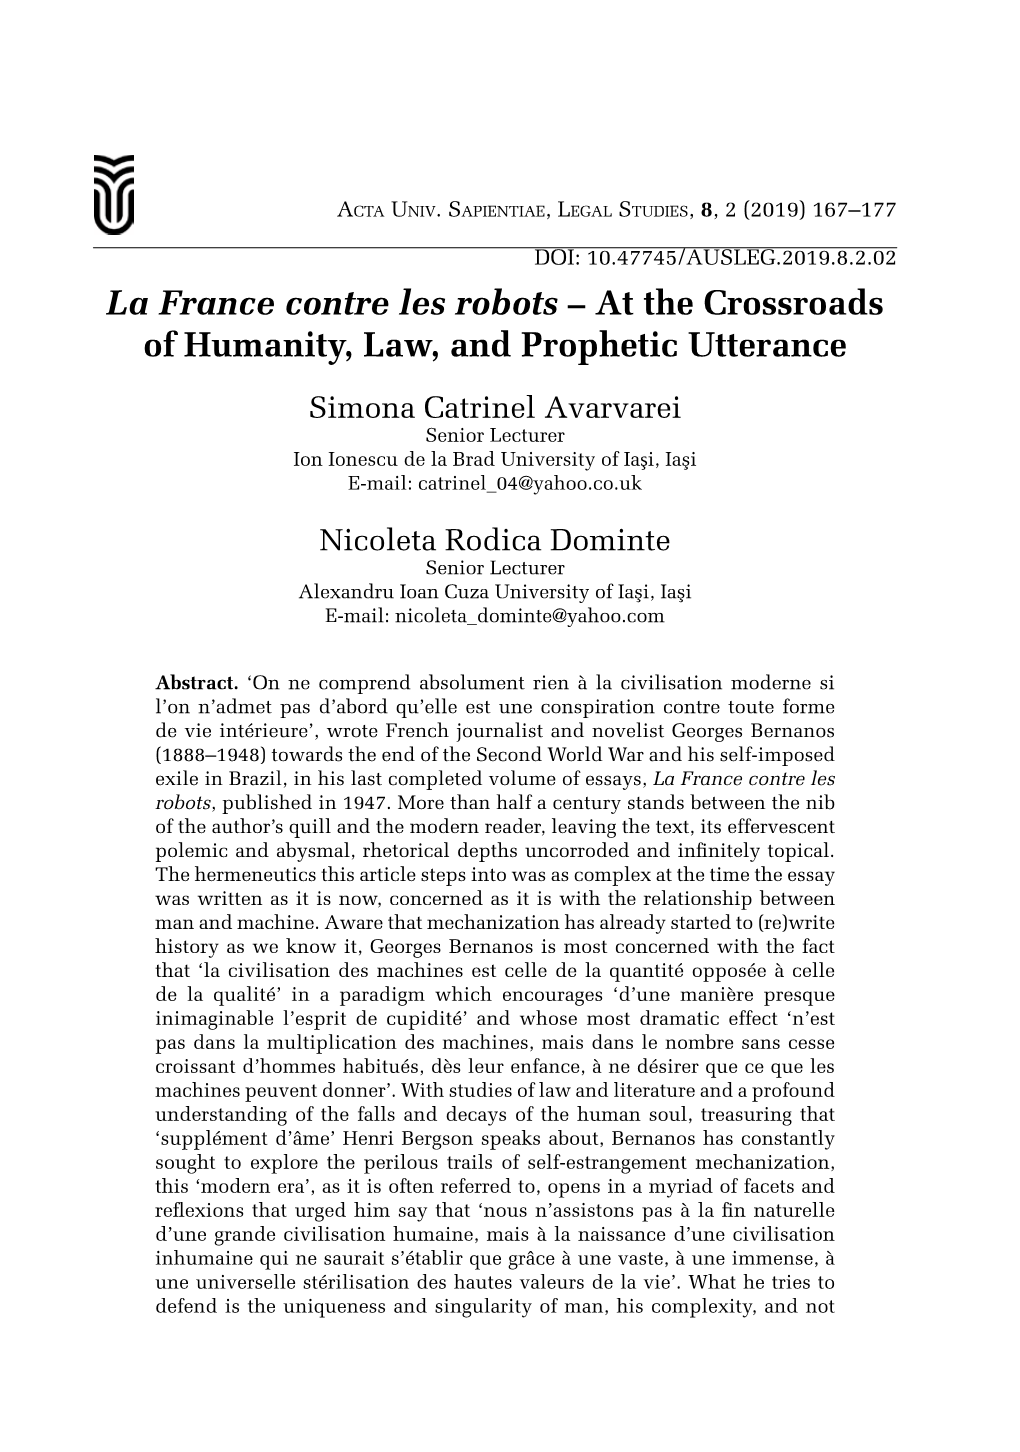 La France Contre Les Robots – at the Crossroads of Humanity, Law, And